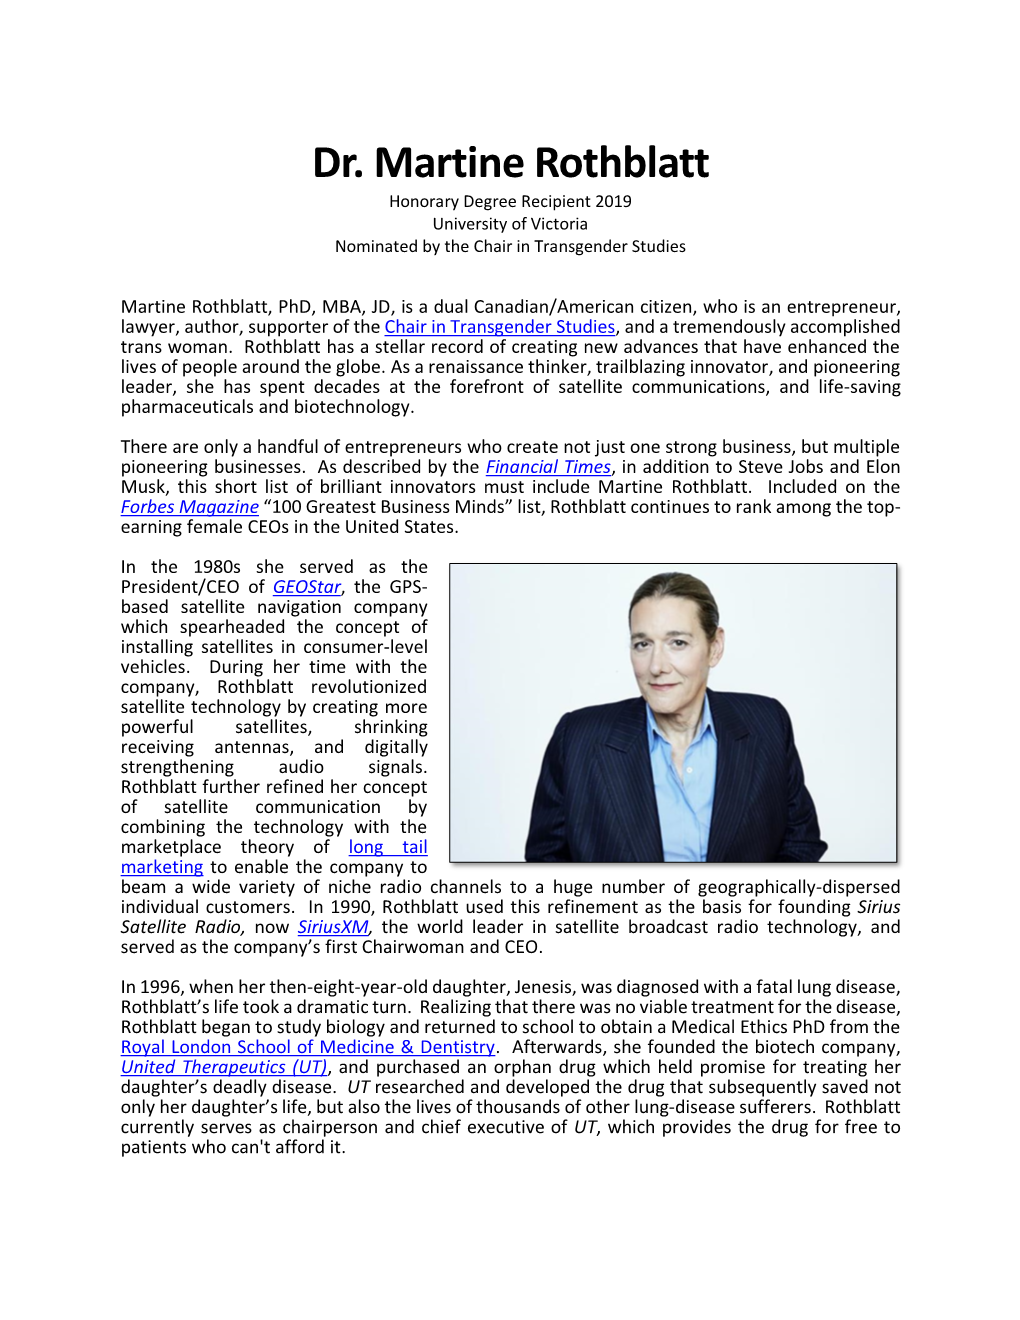 Dr. Martine Rothblatt Honorary Degree Recipient 2019 University of Victoria Nominated by the Chair in Transgender Studies